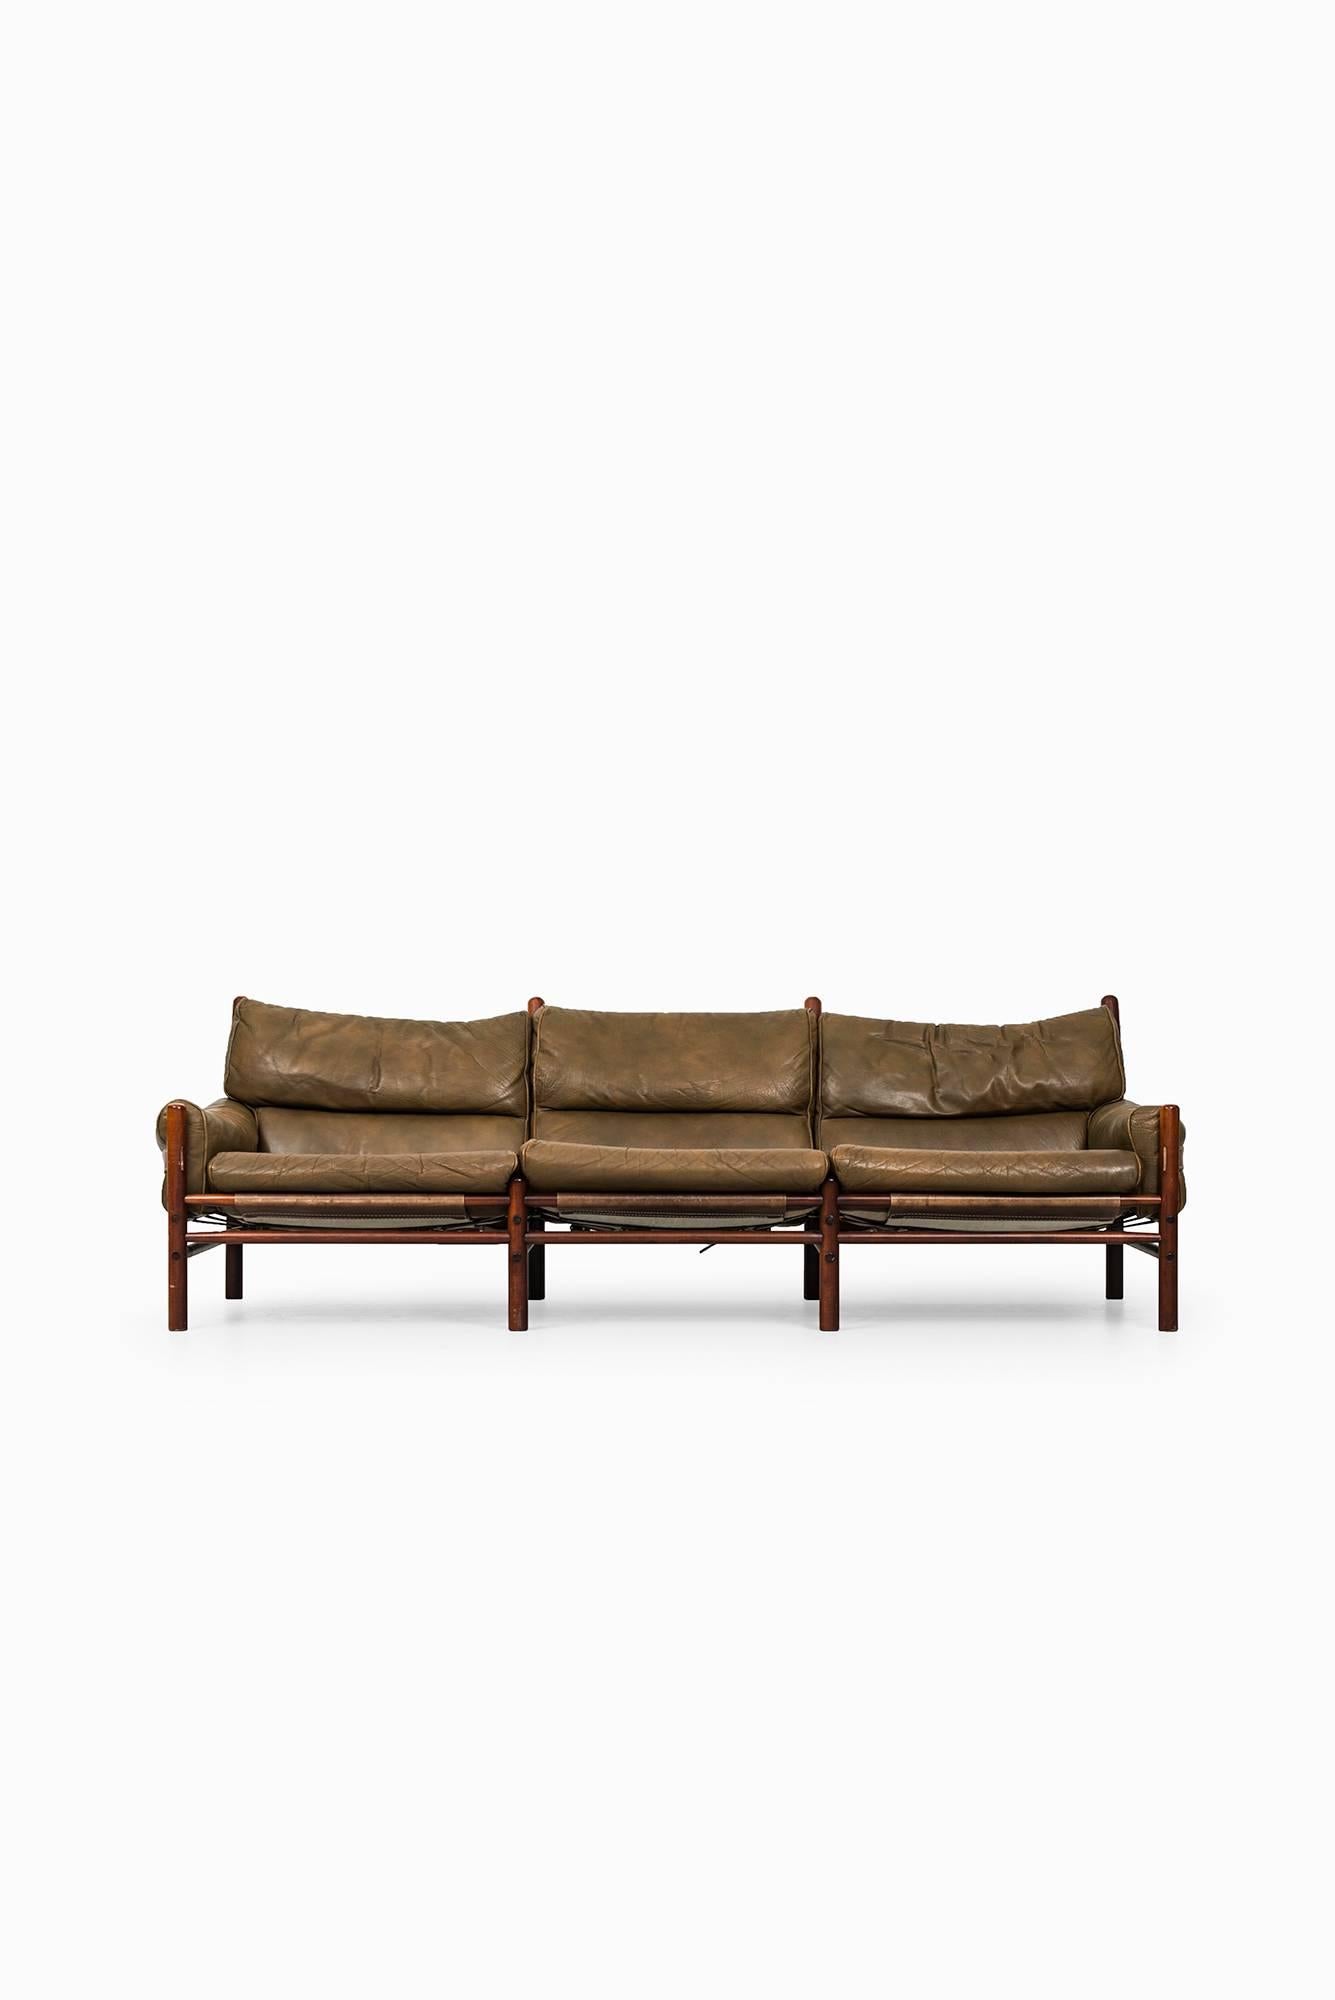 Sofa model Kontiki designed by Arne Norell. Produced by Arne Norell AB in Aneby, Sweden.